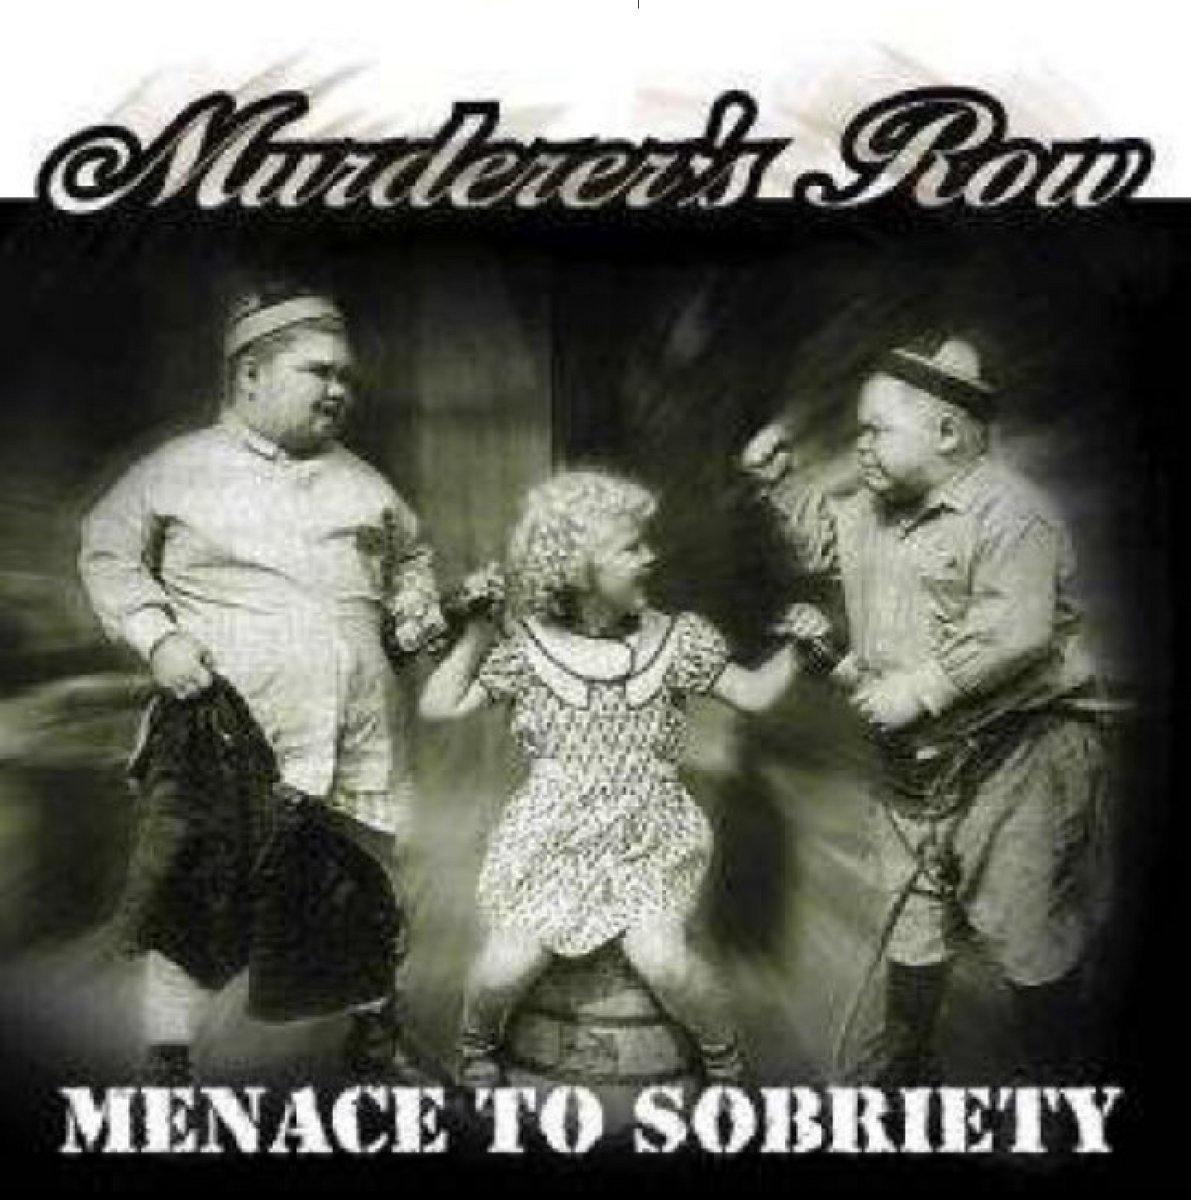 Buy – Murderer's Row "Menace to Society" CD – Band & Music Merch – Cold Cuts Merch